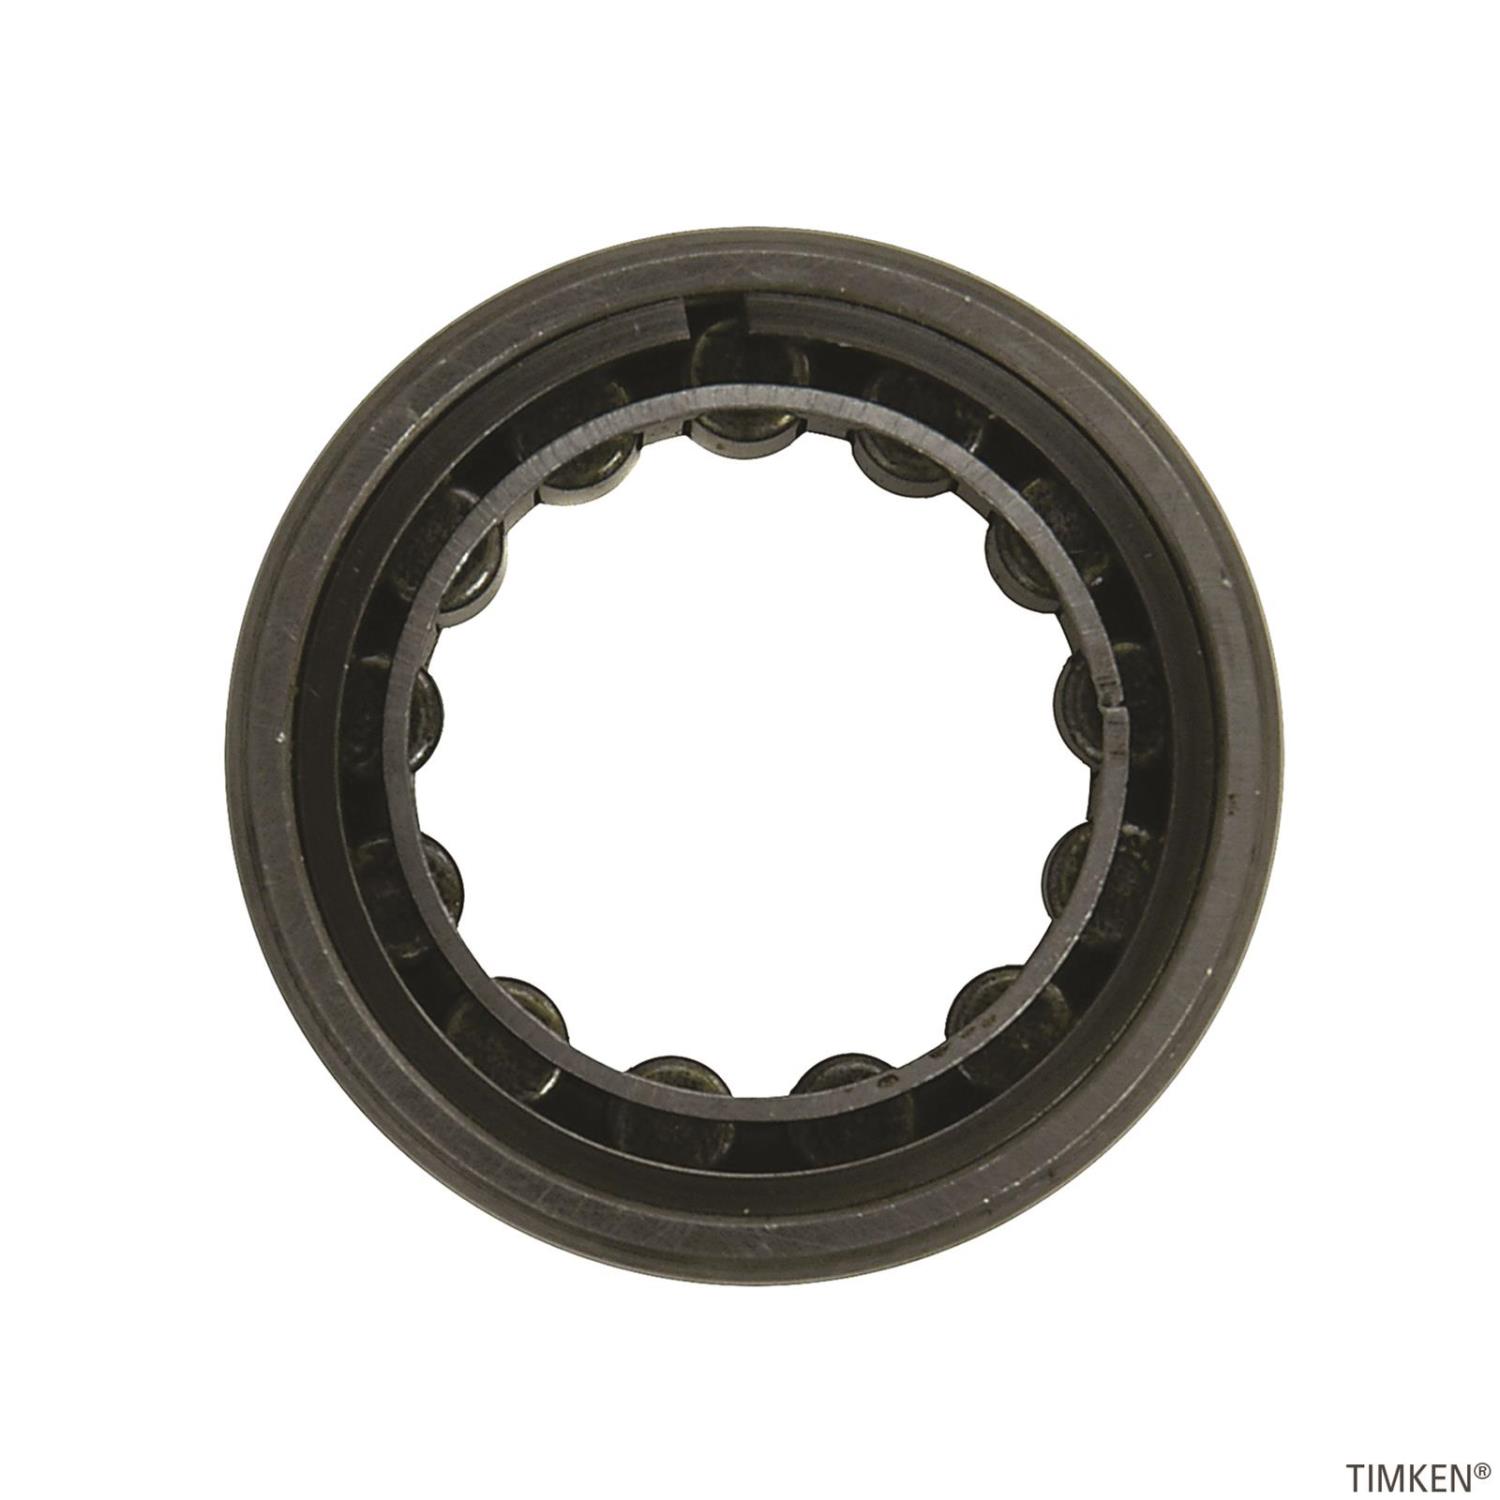 Pinion Bearing for Select 1957-1998 Ford, Lincoln, Mercury Models [1.850 in. Outside Diameter]